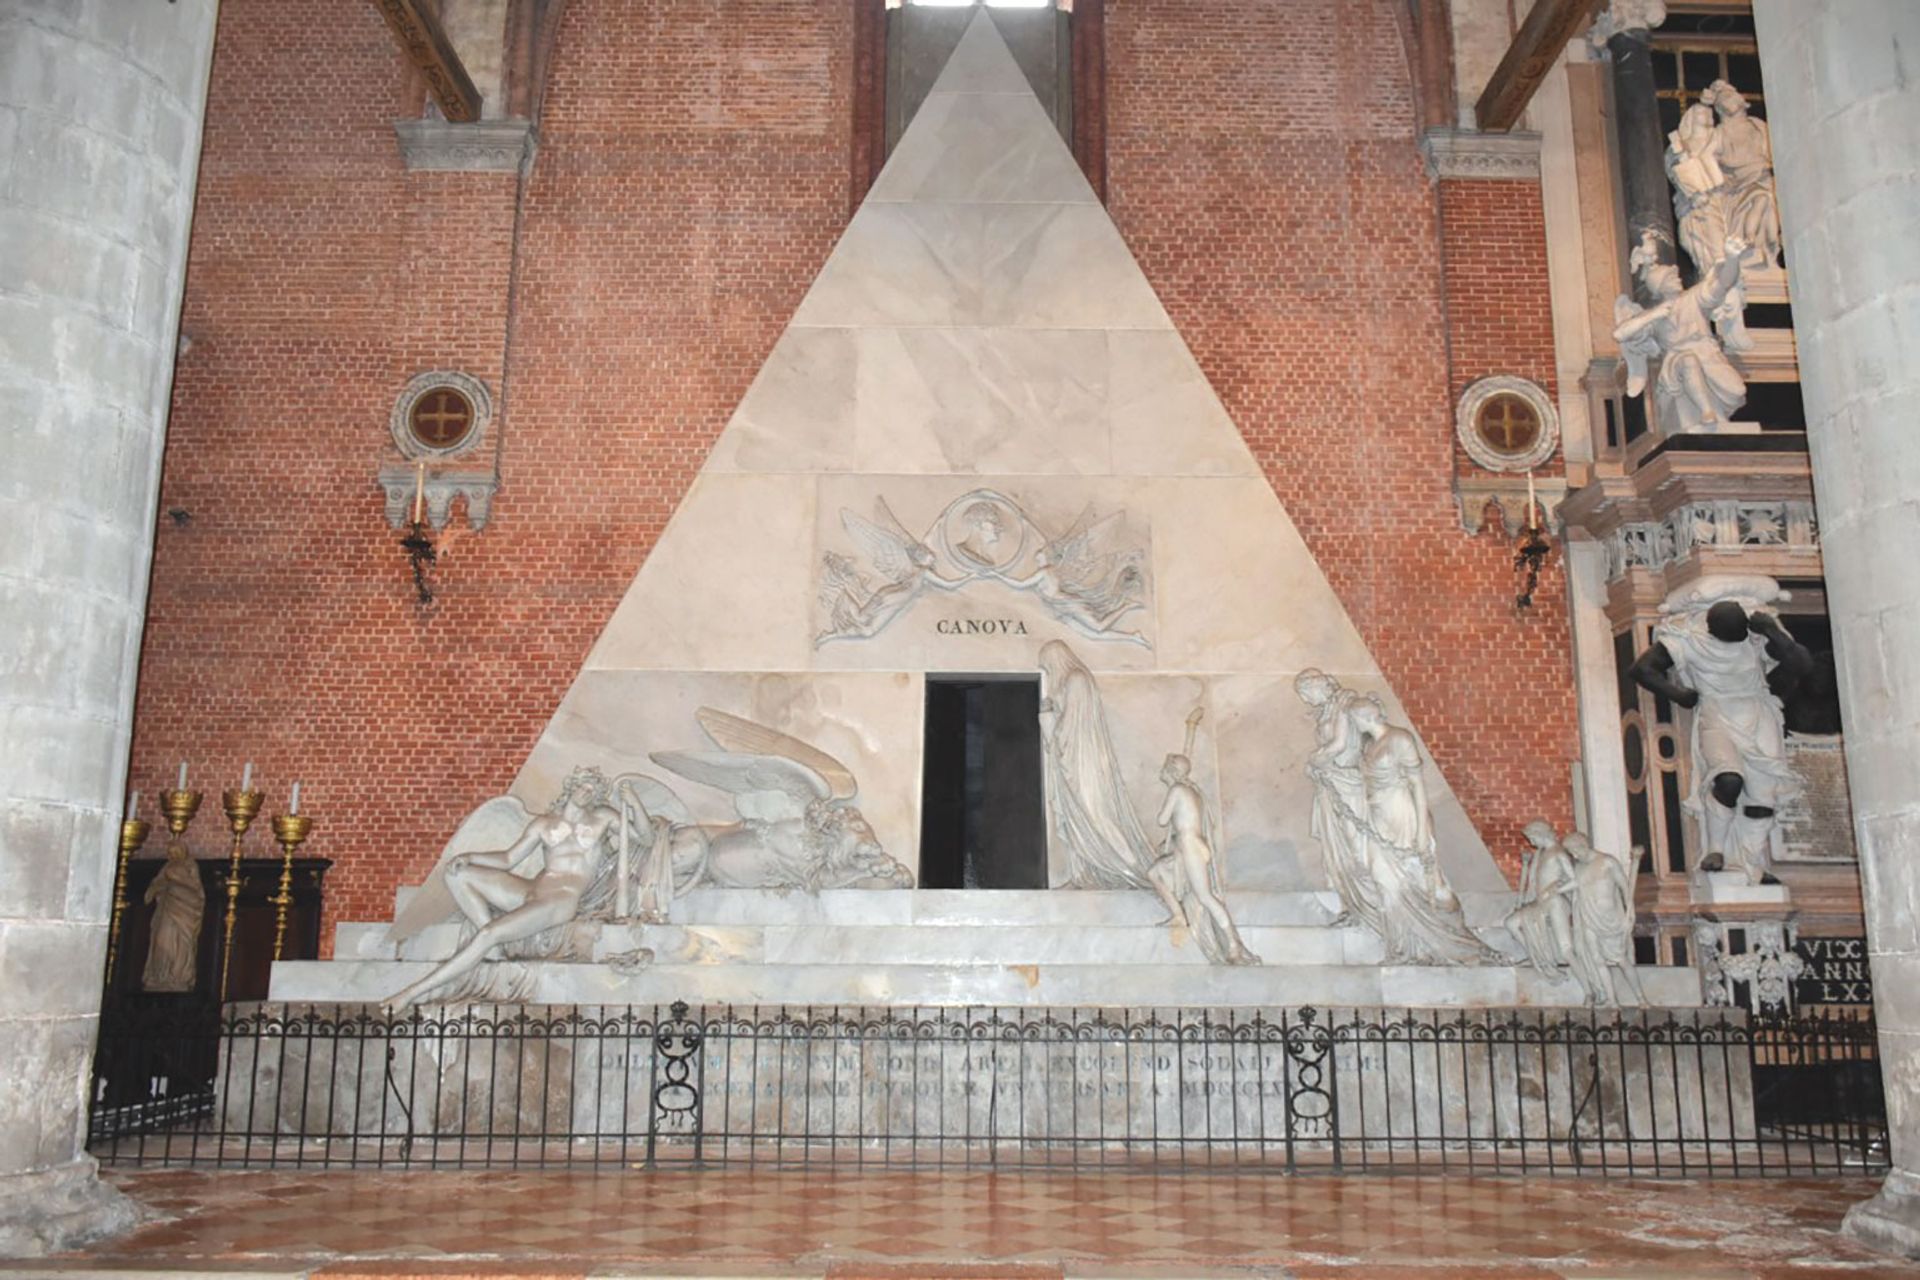 Canova’s monument, sculpted from Carrara marble, was treated for damage caused by factors including rising damp and blocked downpipes. The monument will be unveiled to mark the bicentennial of the sculptor’s death

Photo: Joan Porcel



